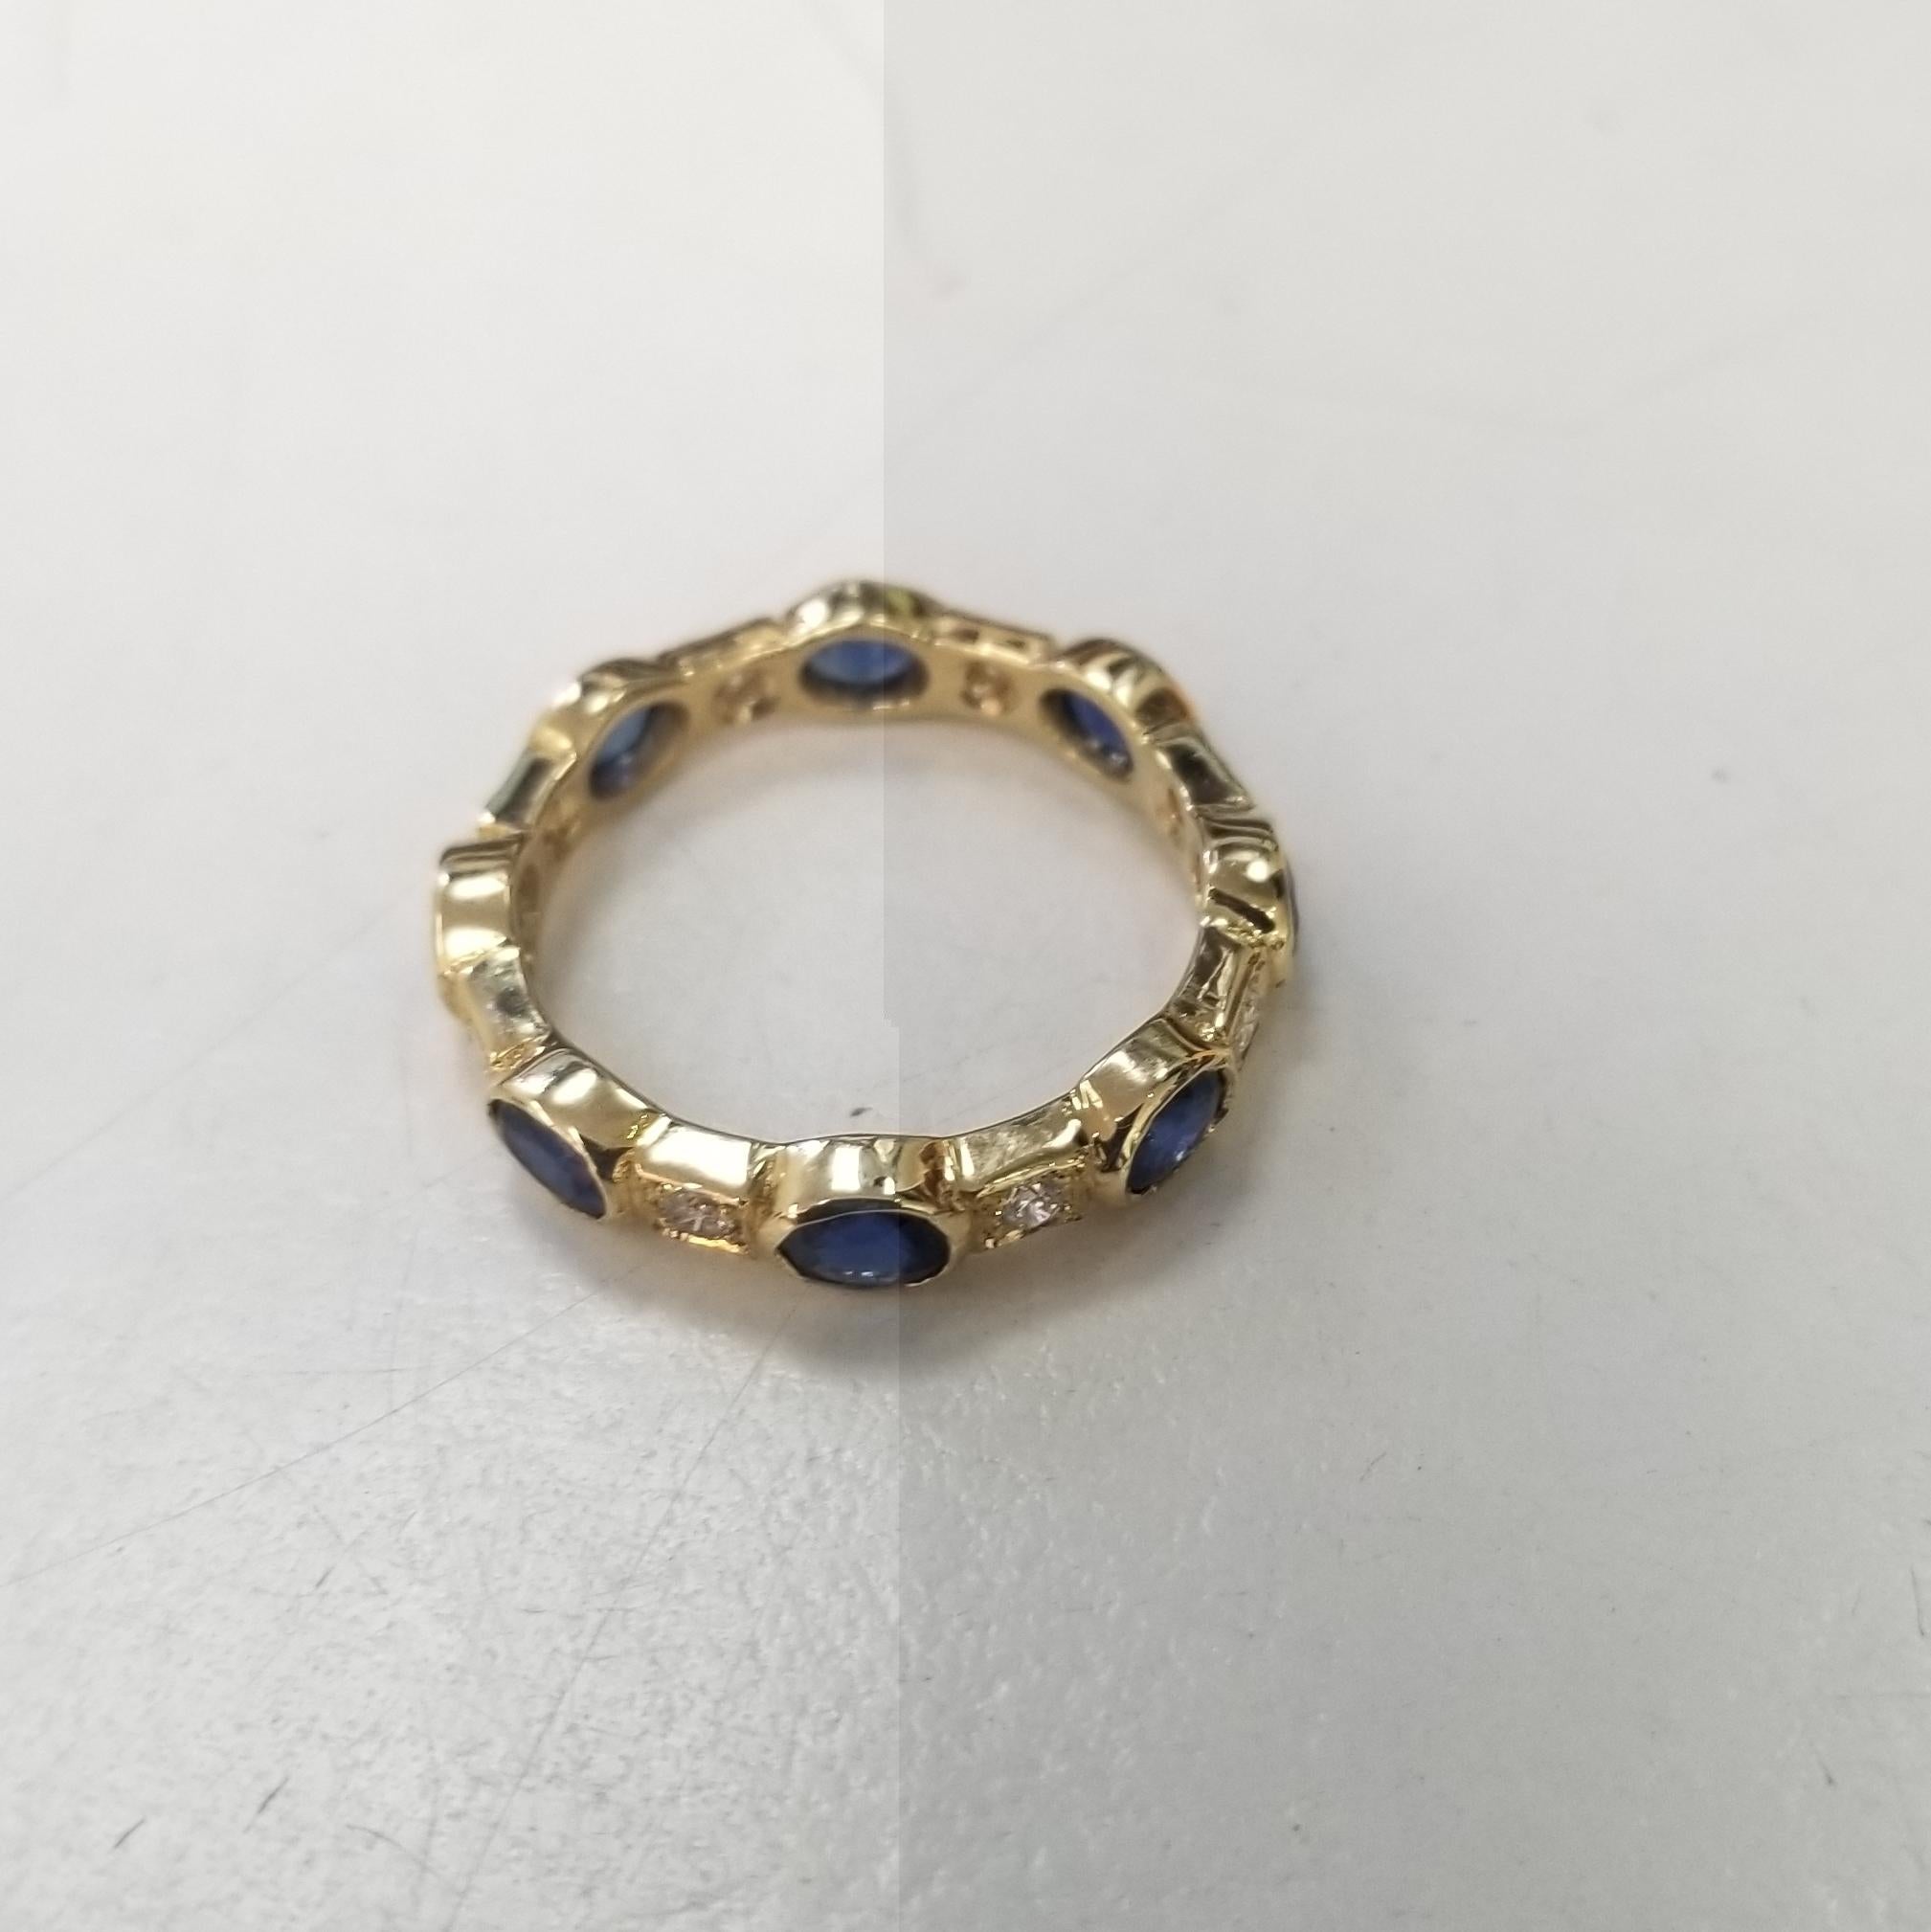 Beautiful sapphire and diamond ring.
Specifications:
    main stone: 8 Marquise Sapphires 1.78 cts. 
    diamond; 8 diamonds weighing approx. .20 cts.
    diamond; clarity: VS
    diamond; color: G
    metal:14k yellow gold
    type:ring 
    weight